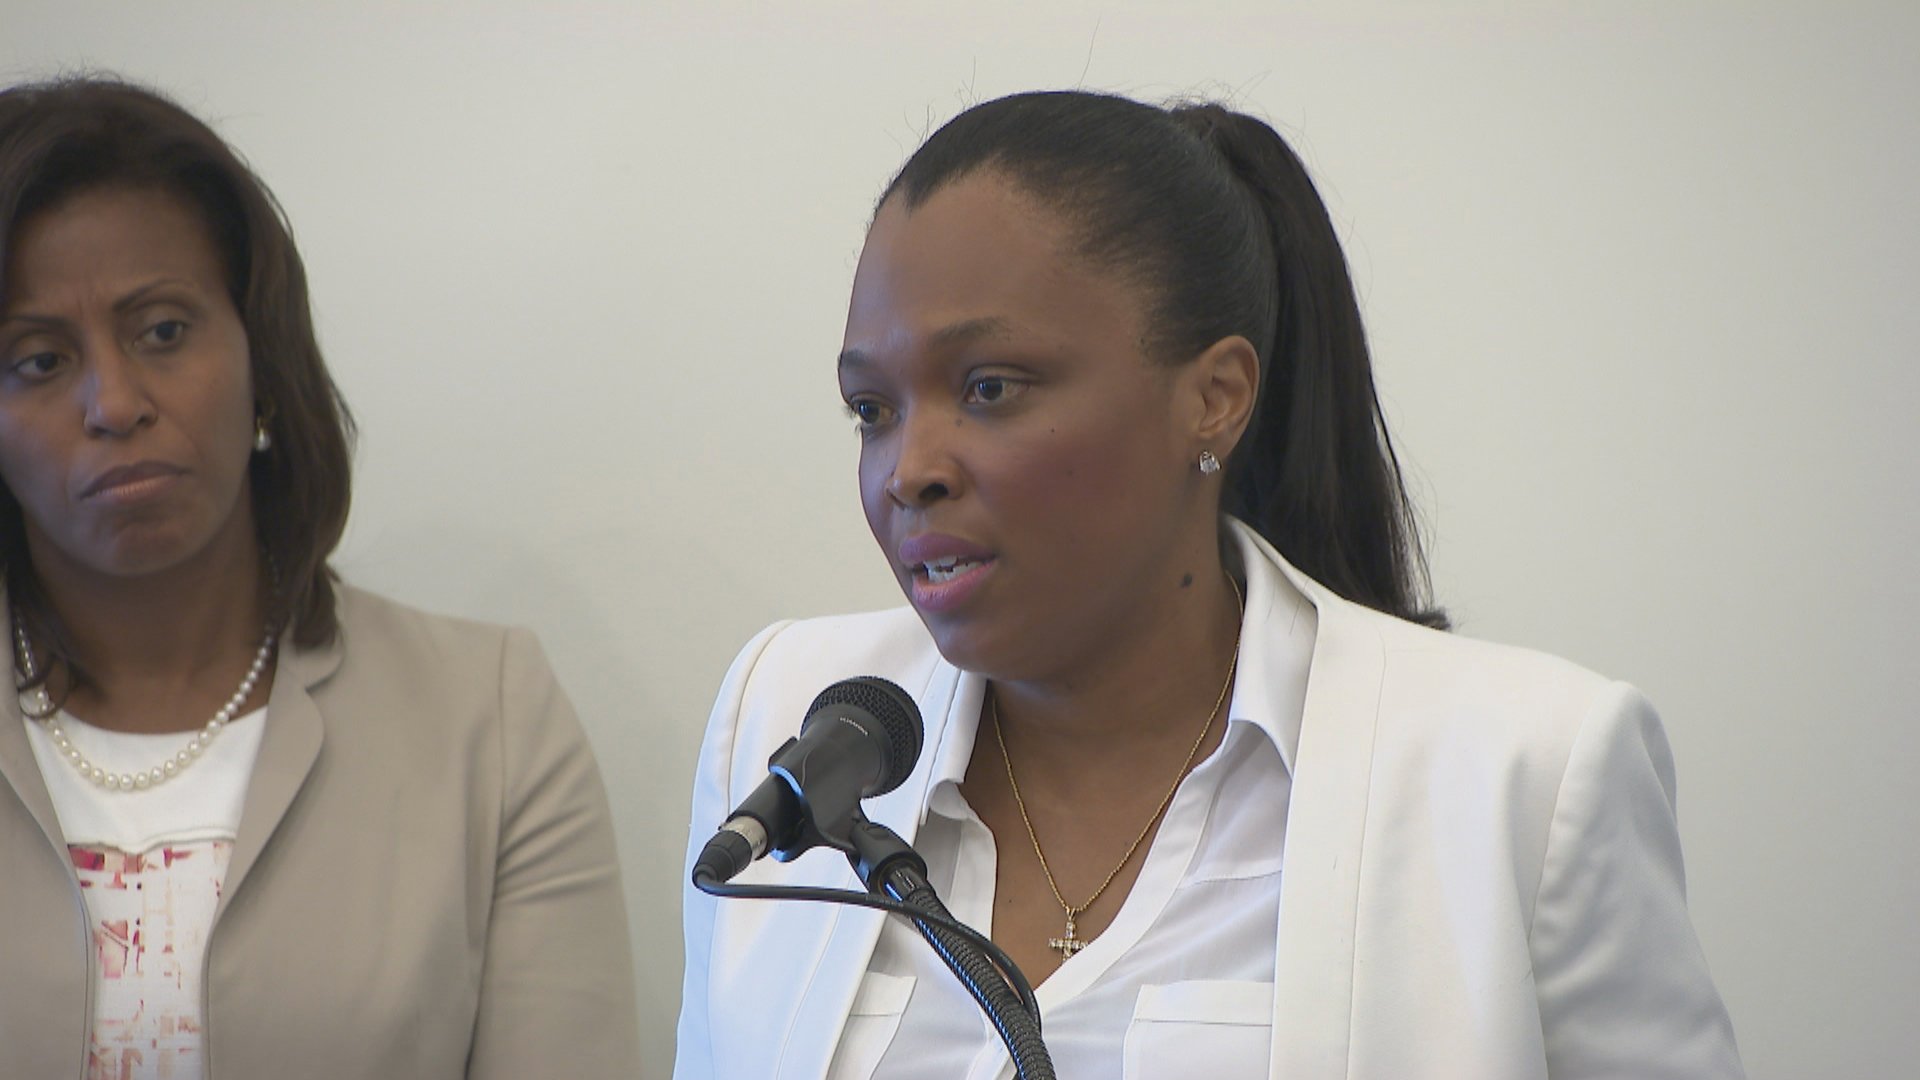 CPS CEO Janice Jackson speaks during a press conference on Monday, June 18, 2018. (Chicago Tonight)